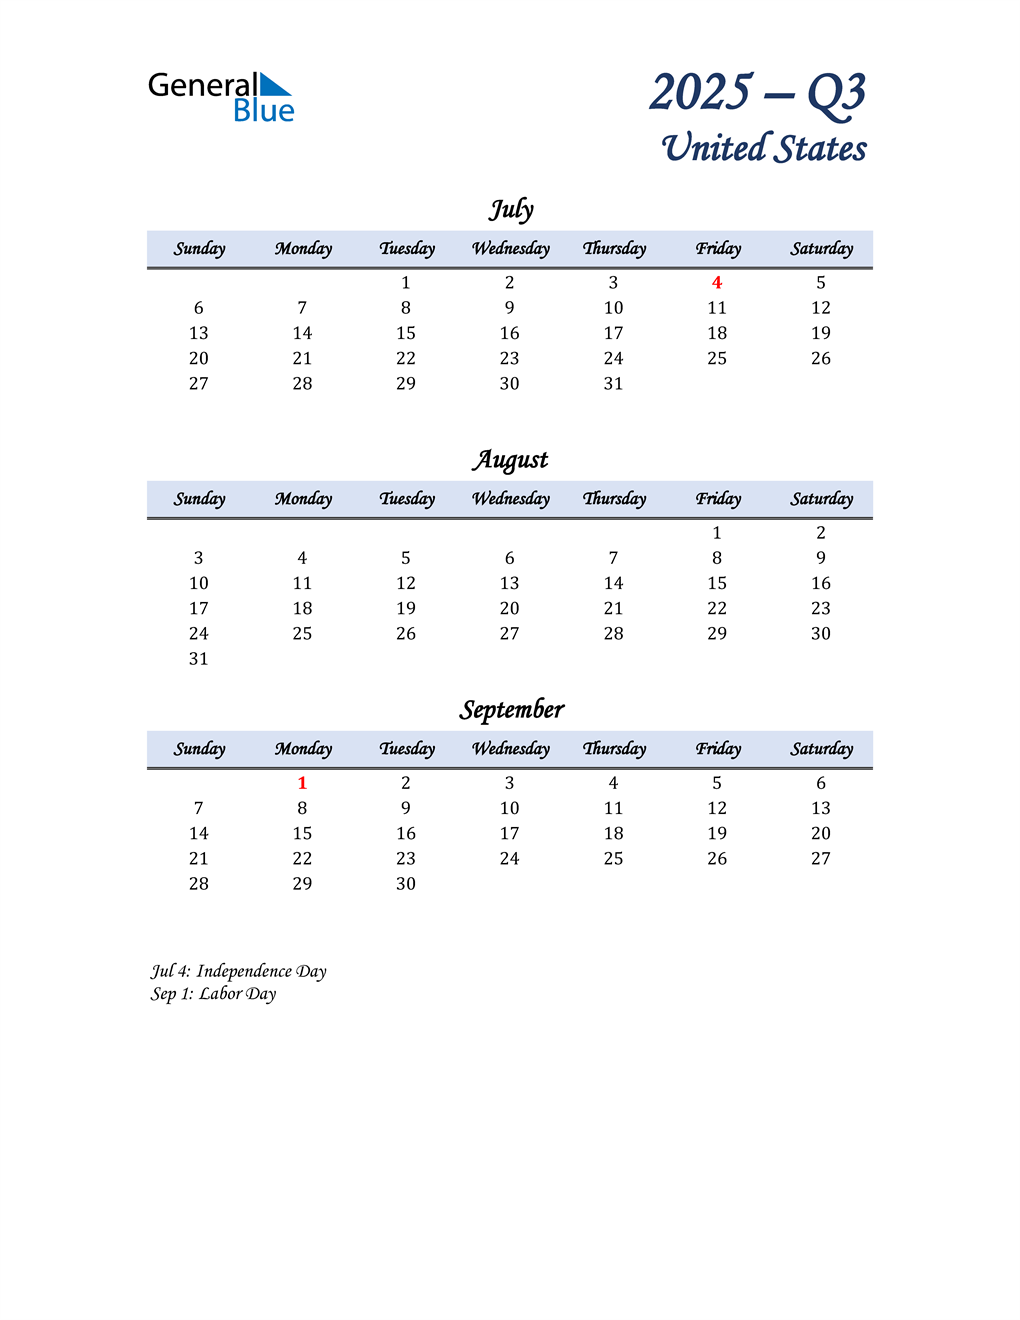  July, August, and September Calendar for United States